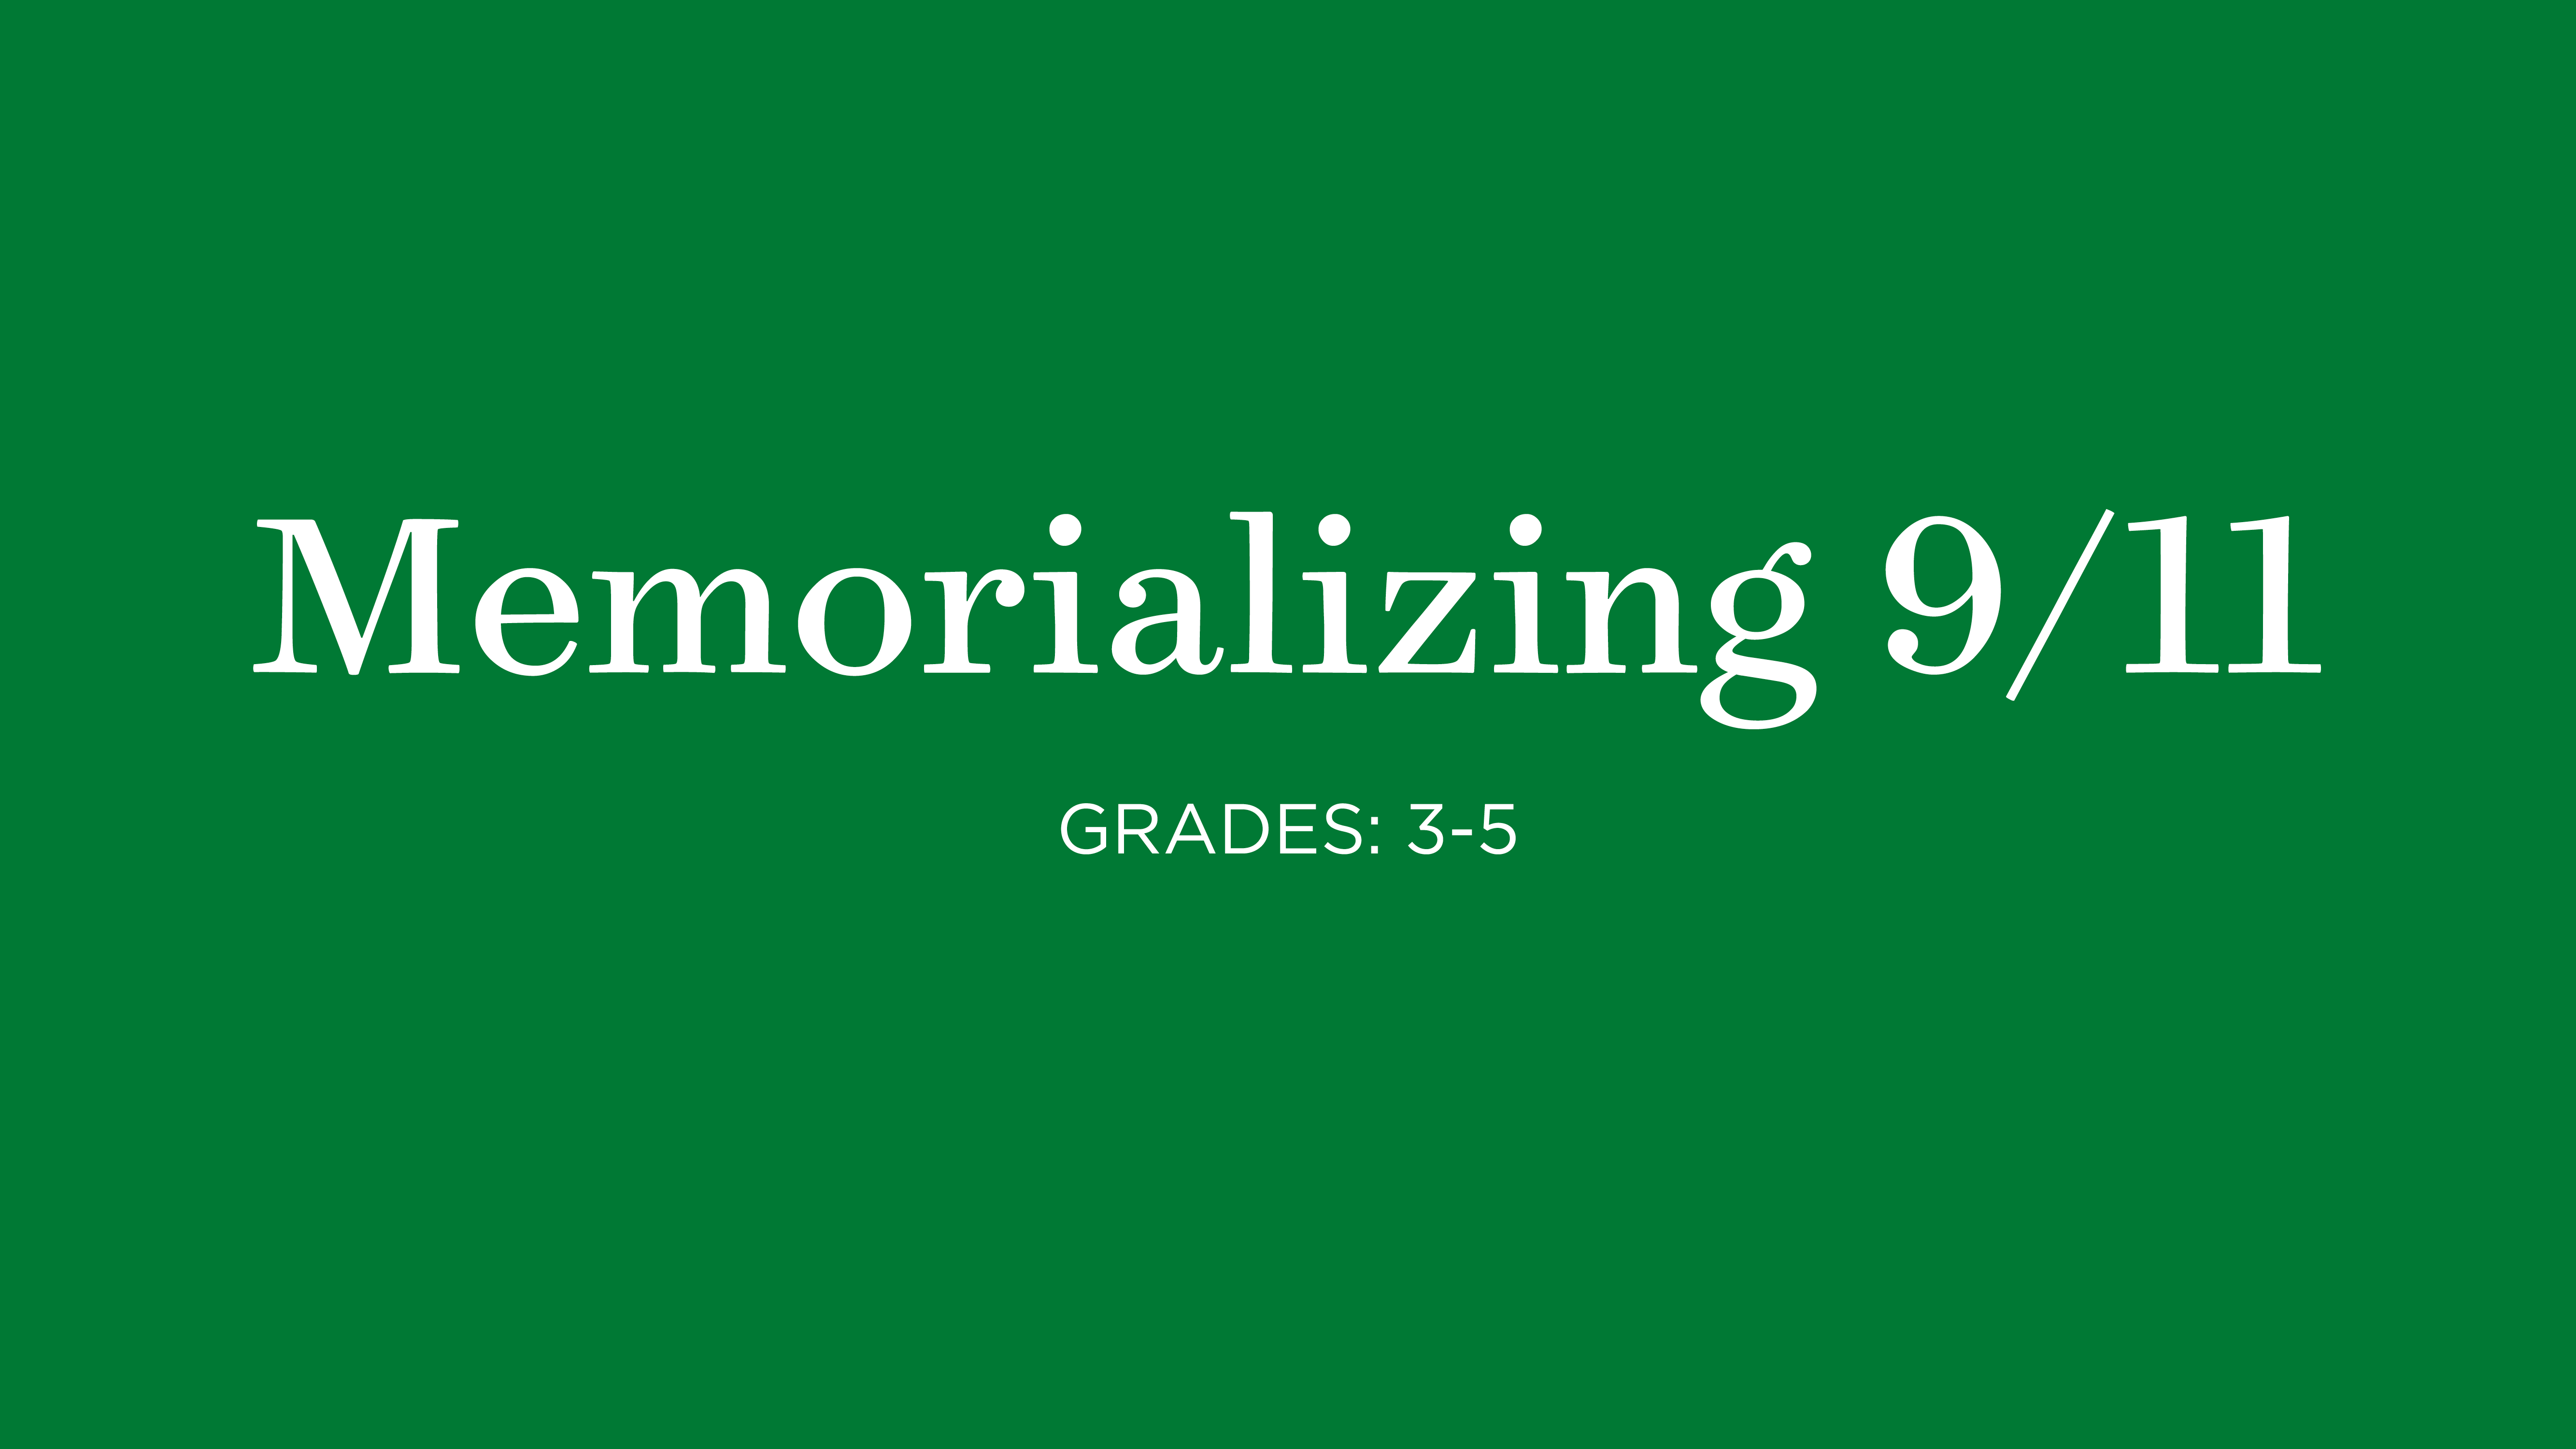 Green square with the words "Memorializing 9/11" Grades 3-5